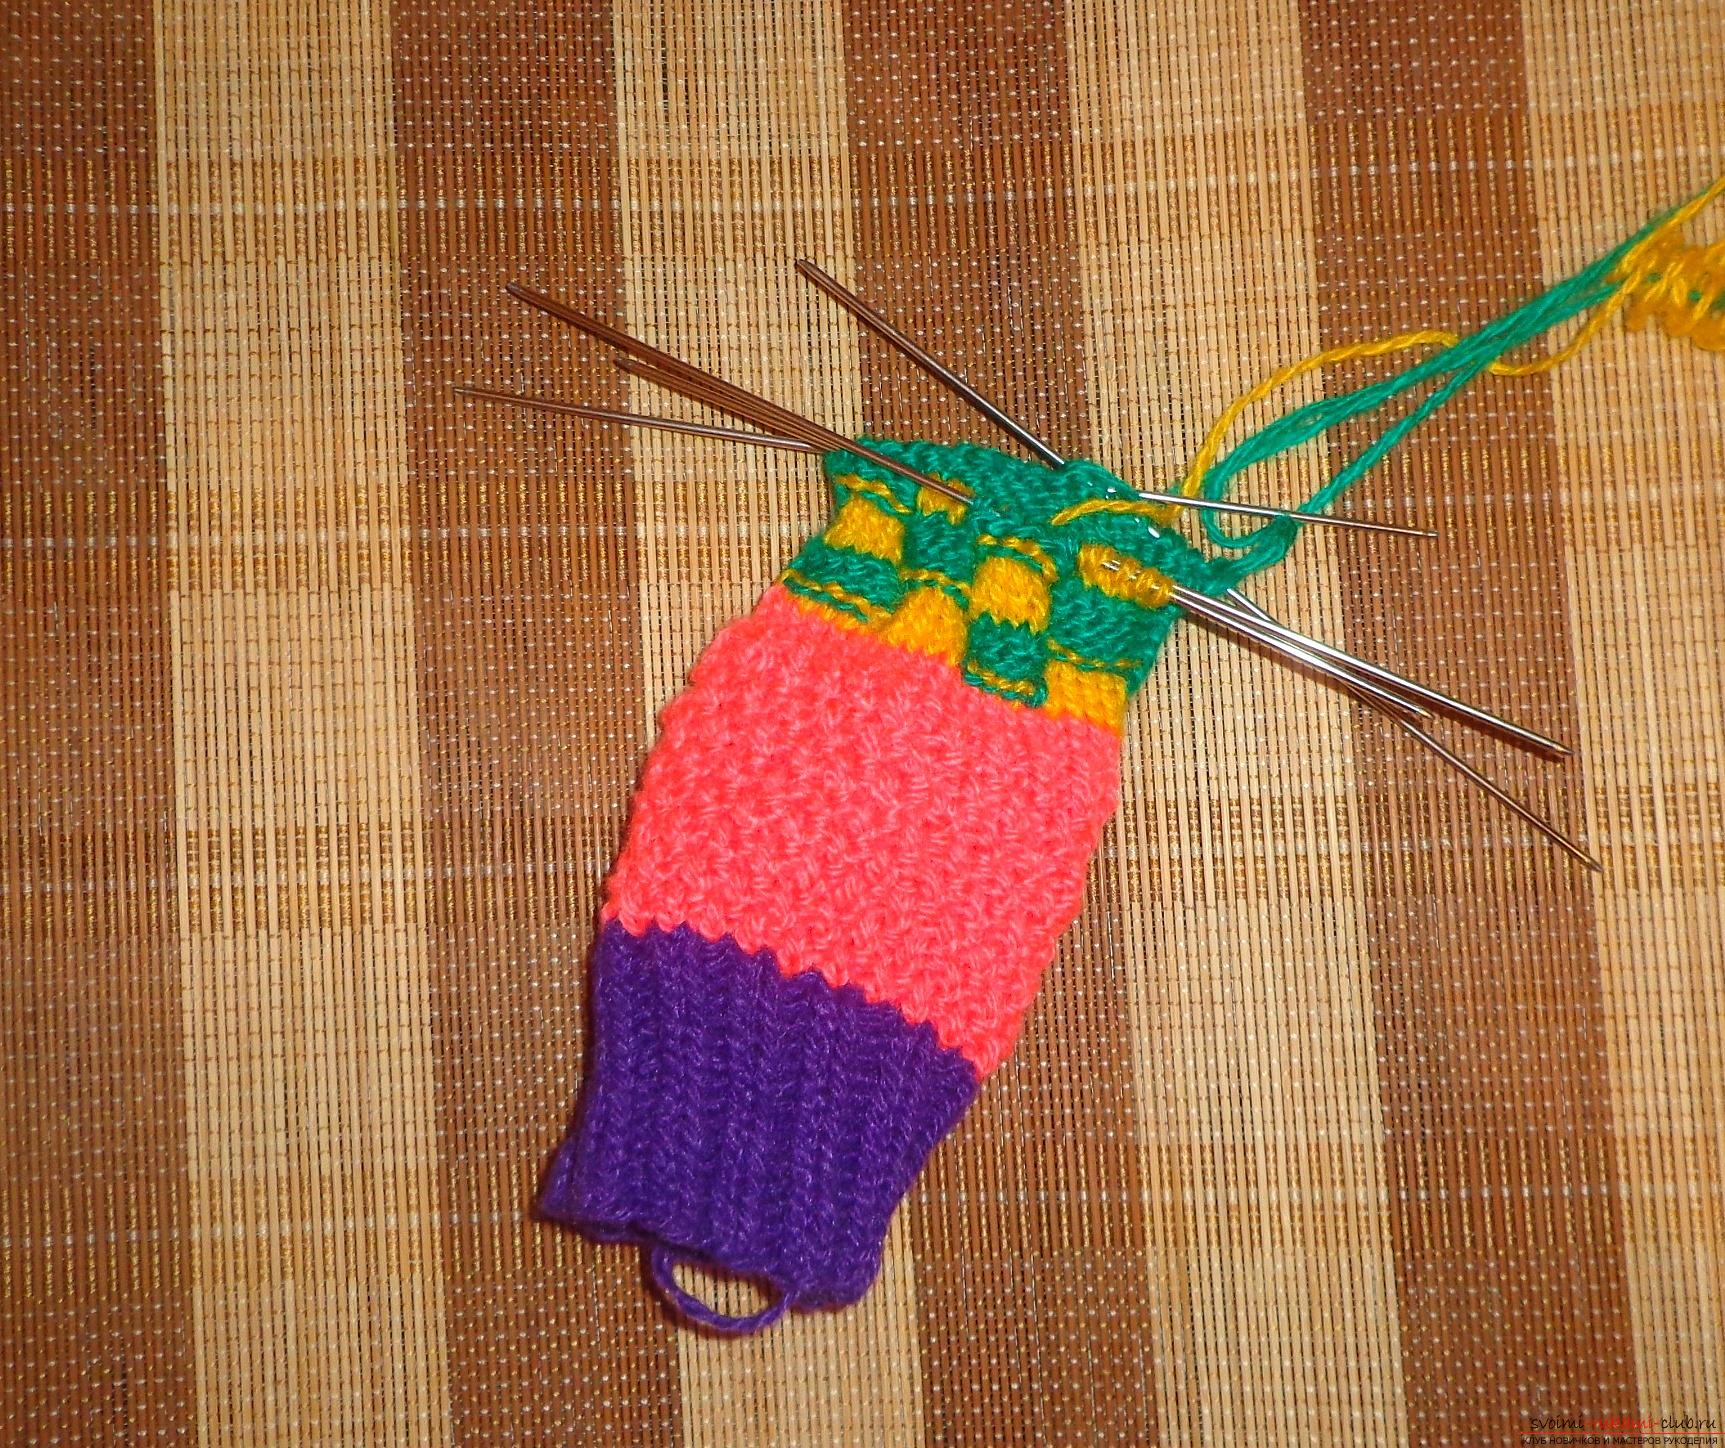 Photo to knitting lessons on knitting needles 